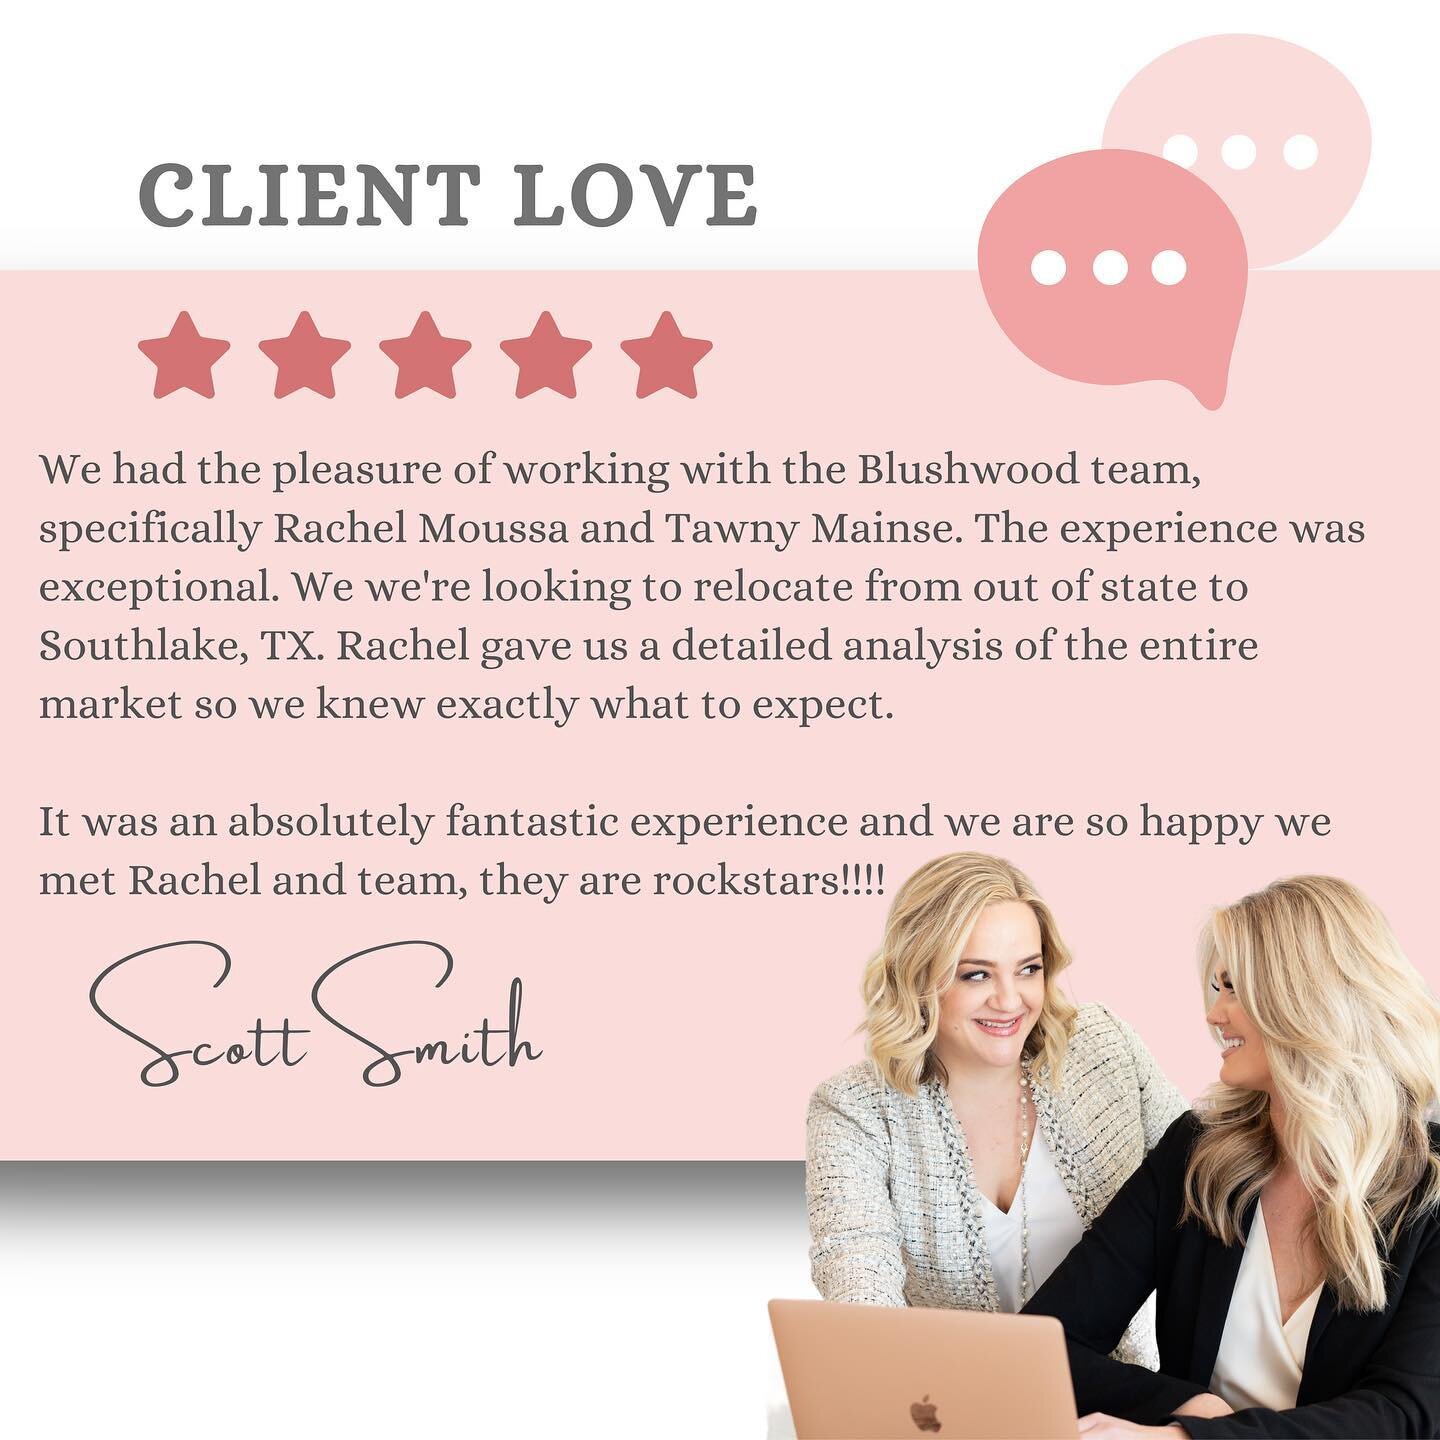 Thank you Scott and Kelly! The pleasure is all ours to know such amazing people and clients of Blushwood 💕 thank you for your trust and we are so excited for your family and your gorgeous Southlake home 🏡